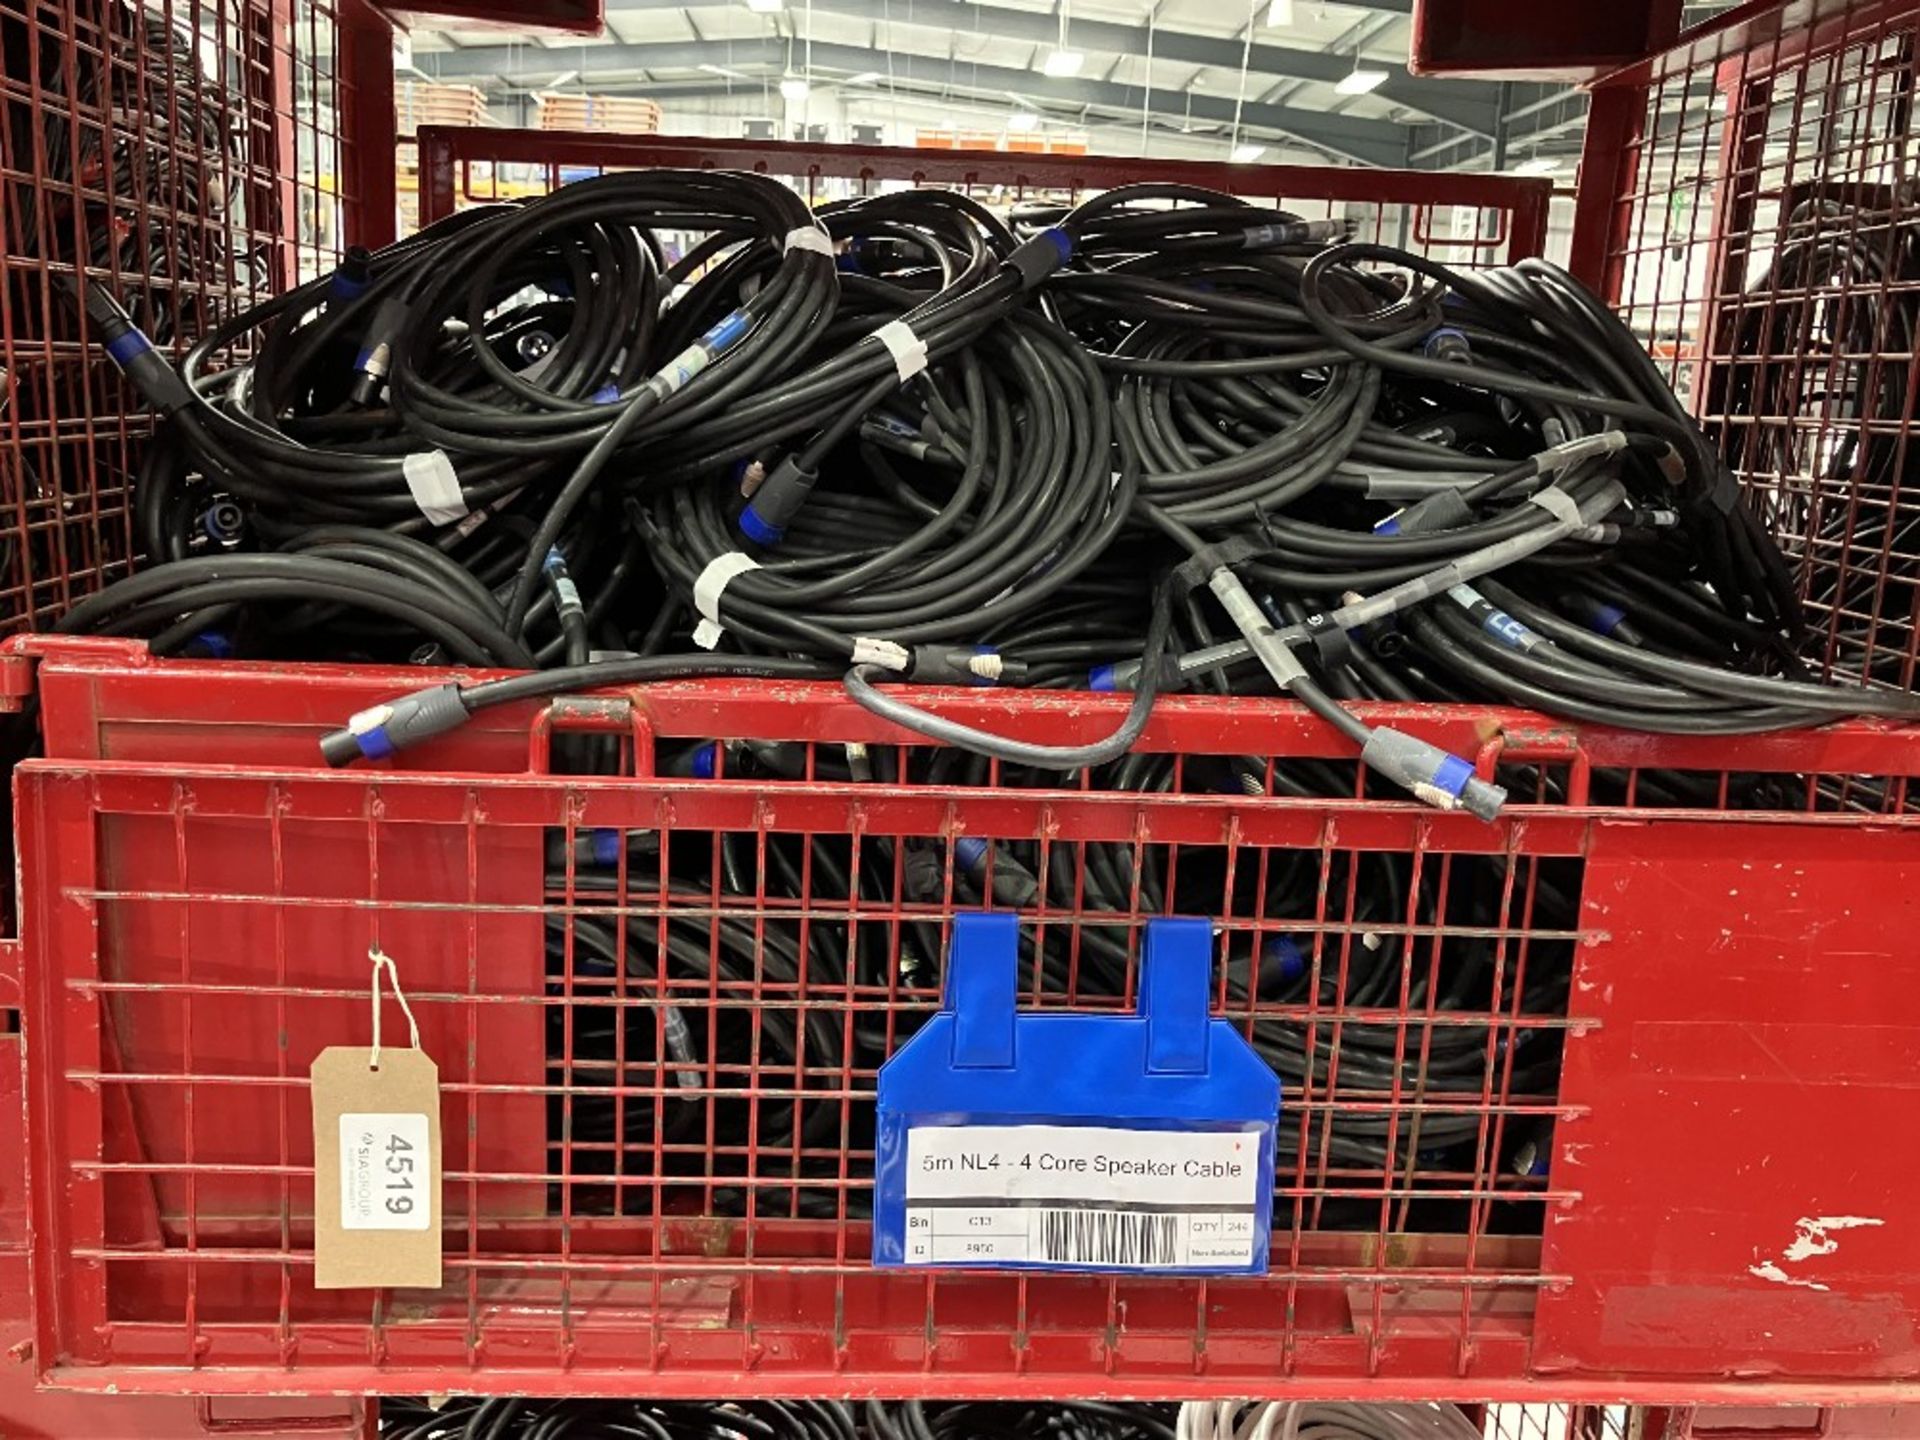 Large Quantity of 5m NL4-4 Core Speaker Cable with Steel Fabricated Stillage - Image 5 of 5